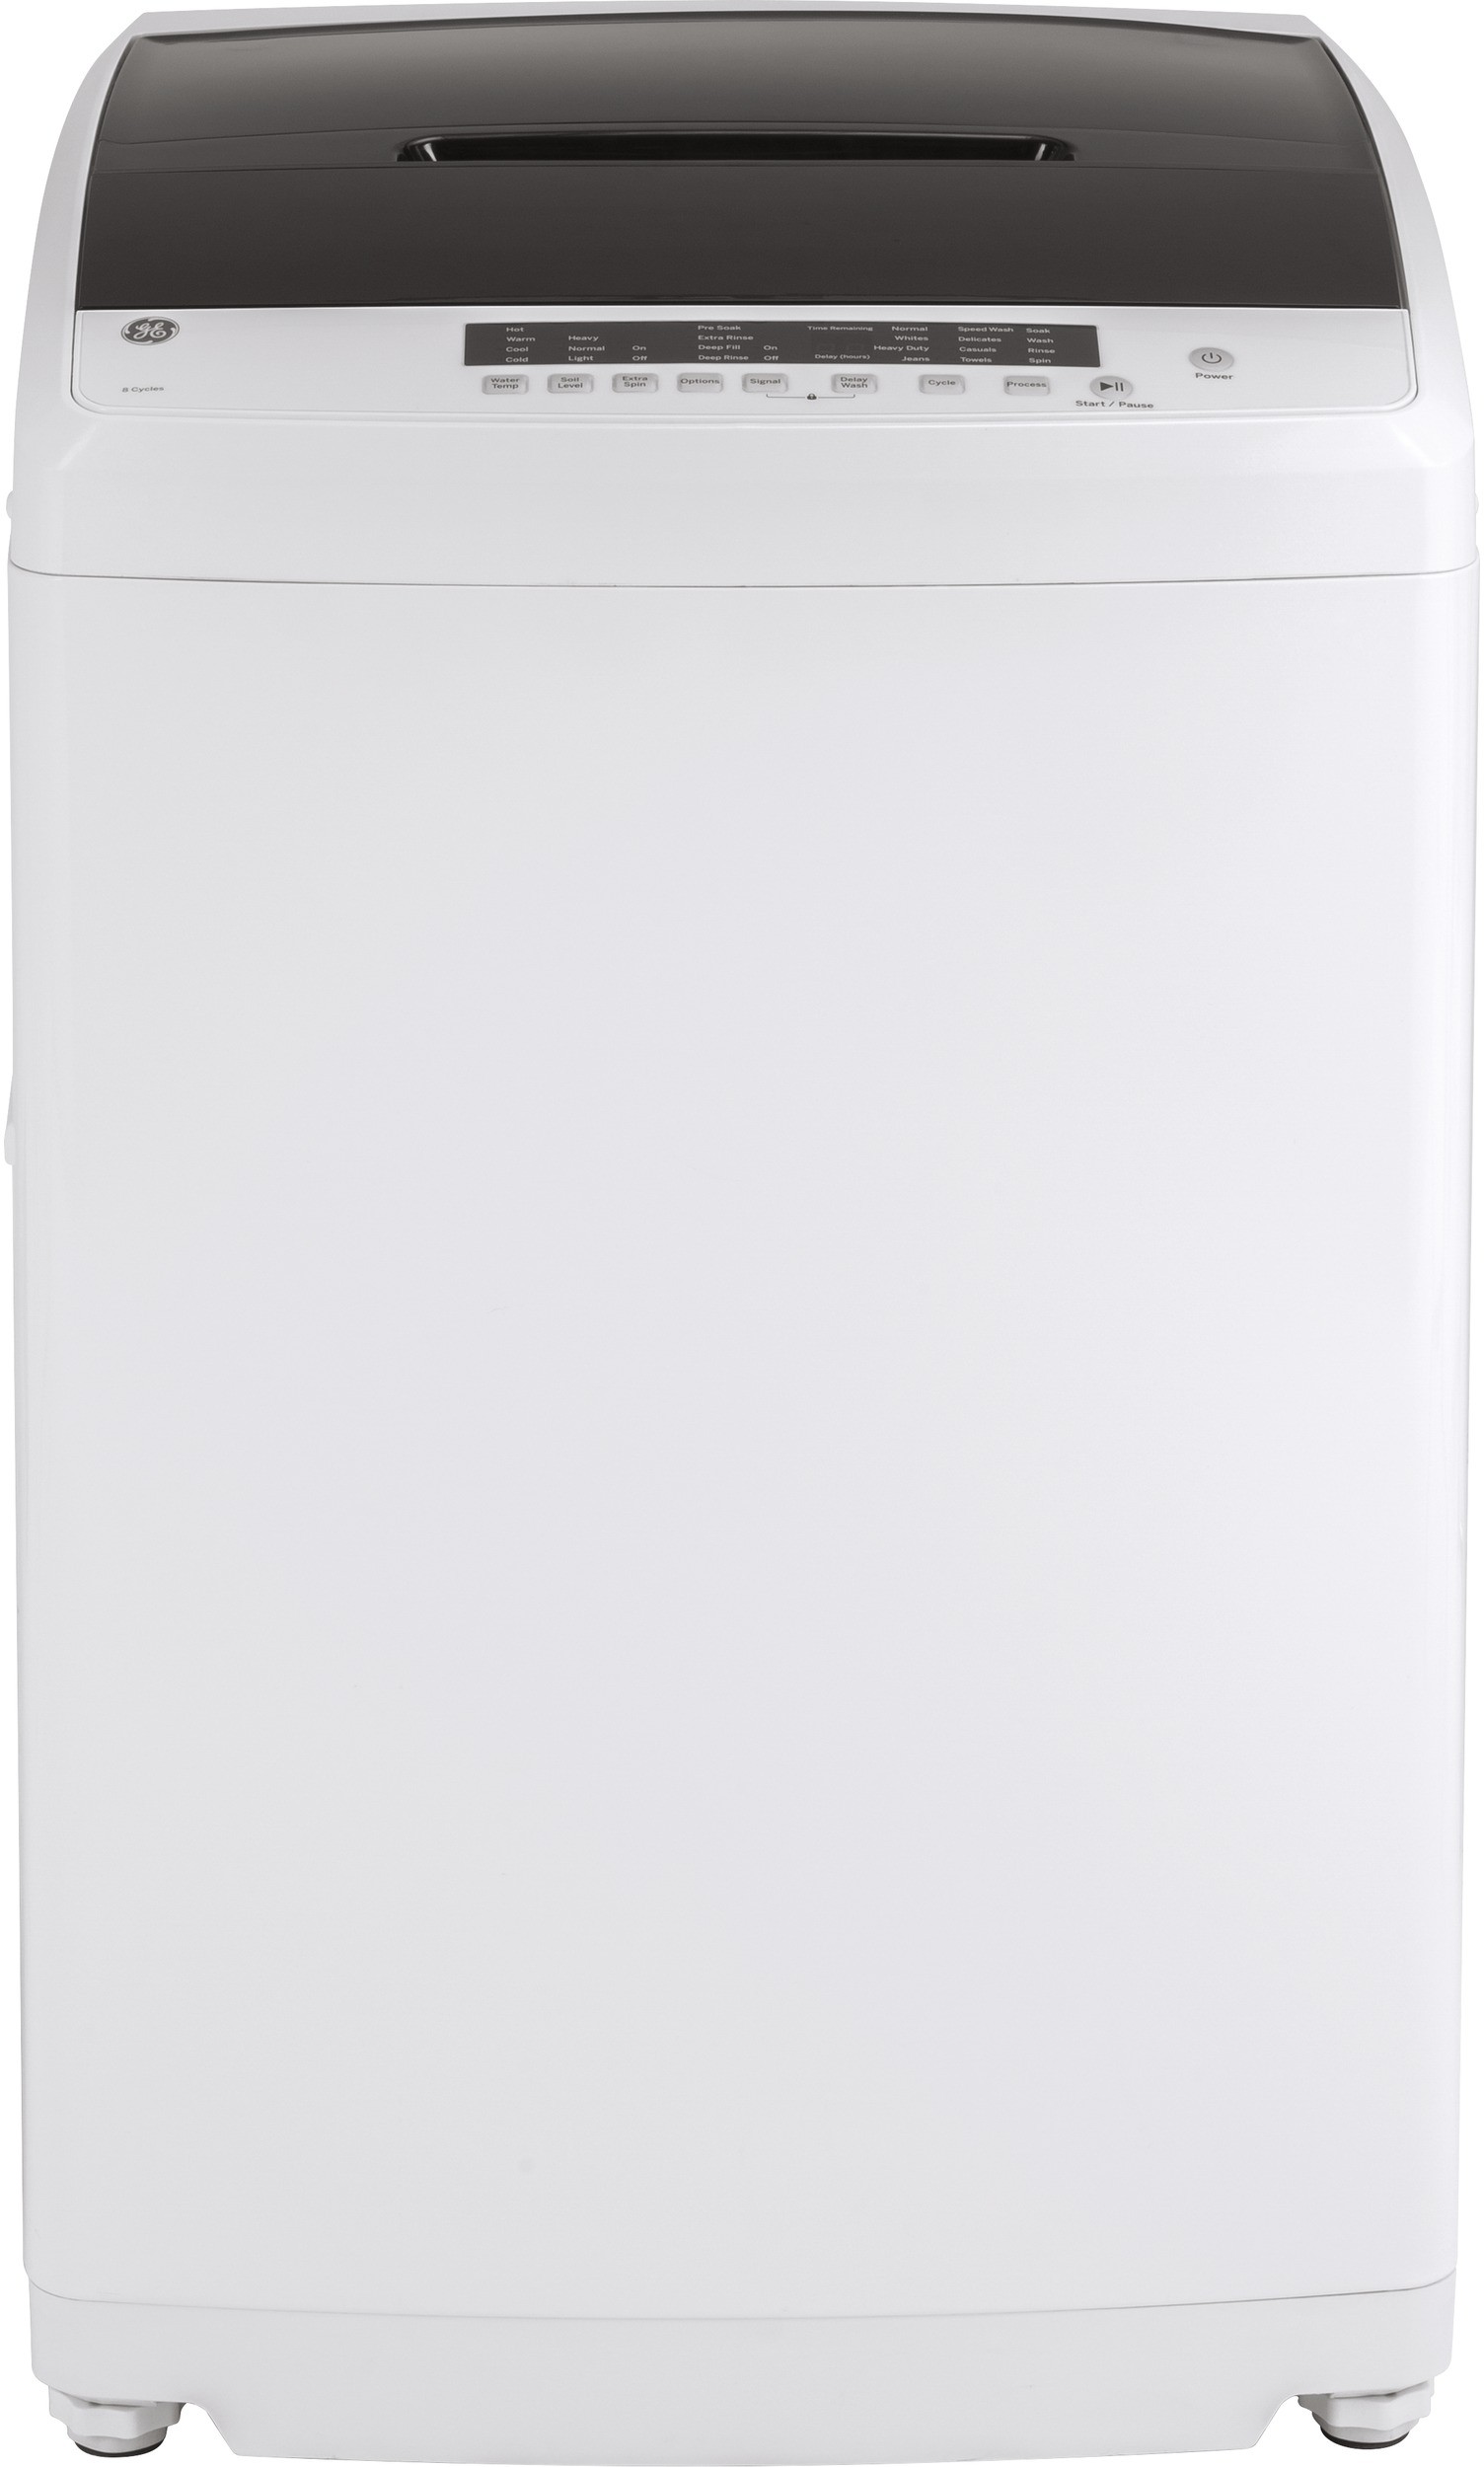 2.8 Cu. Ft. Top Load Washer - GE GNW128PSMWW